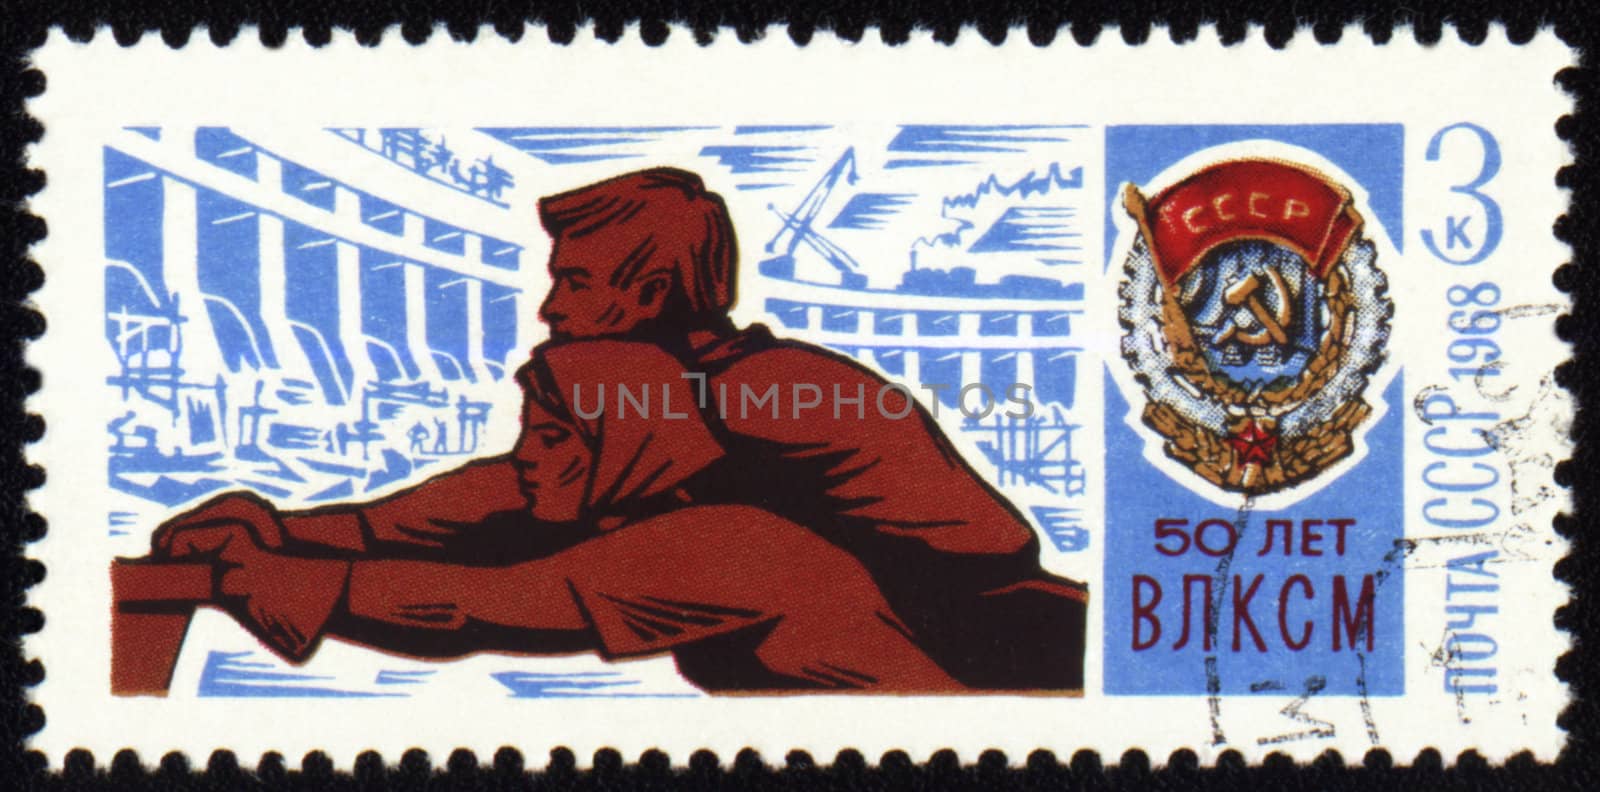 Young workers on postage stamp by wander